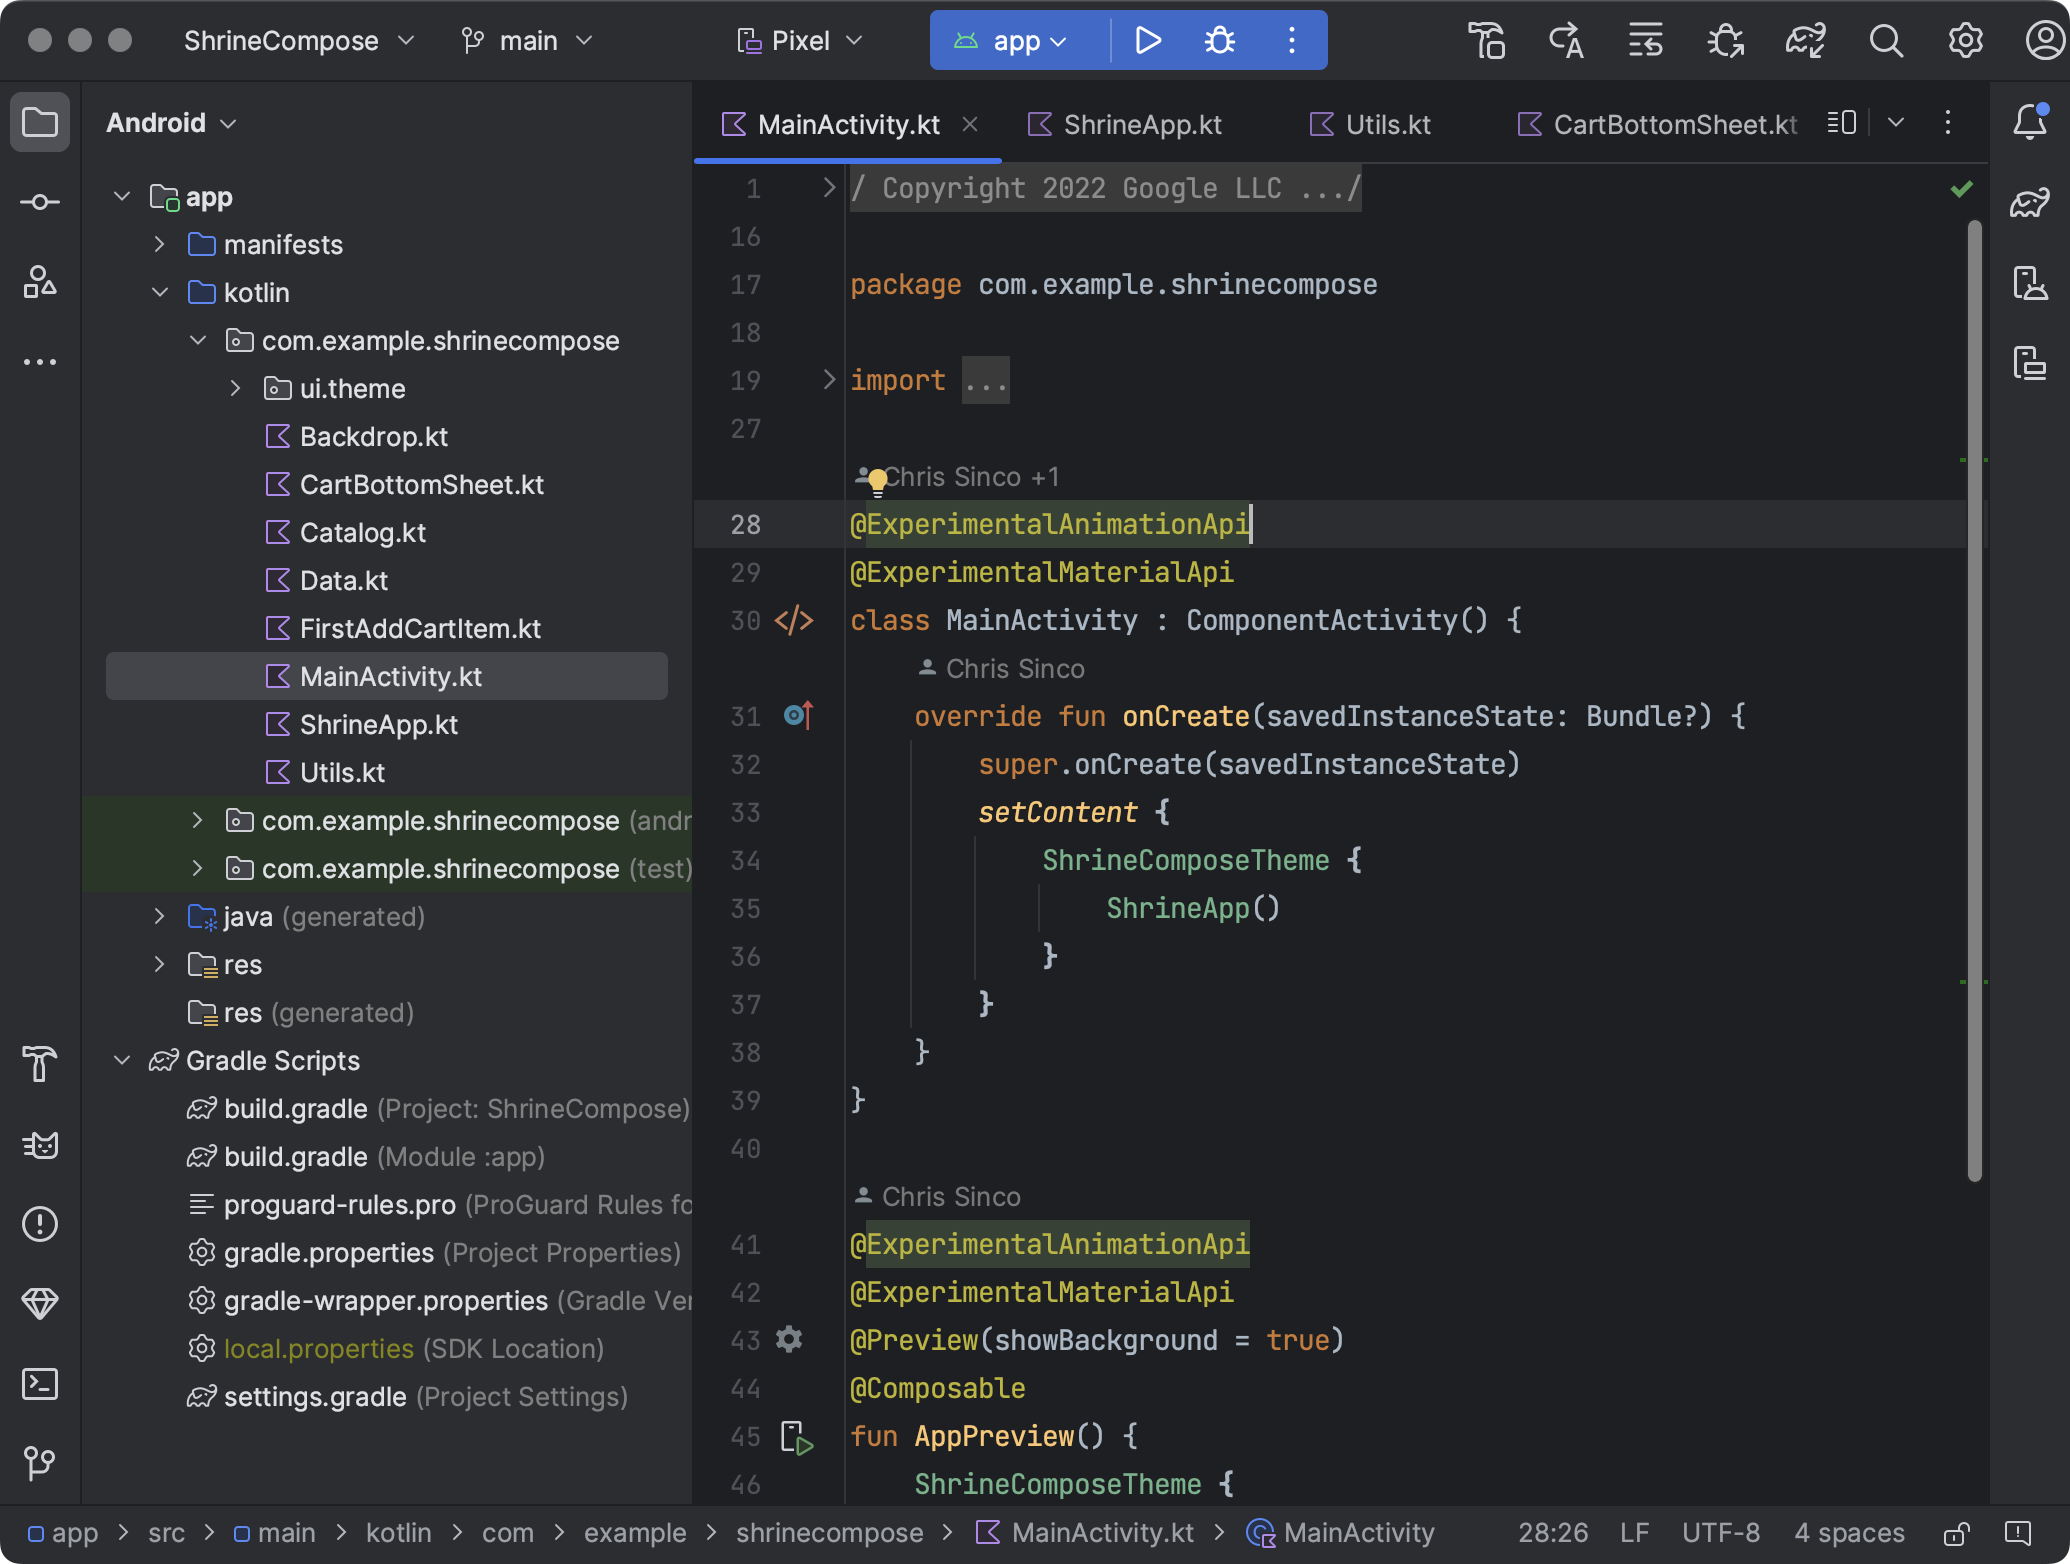 Android Studio 2022.3.1.22 download the new version